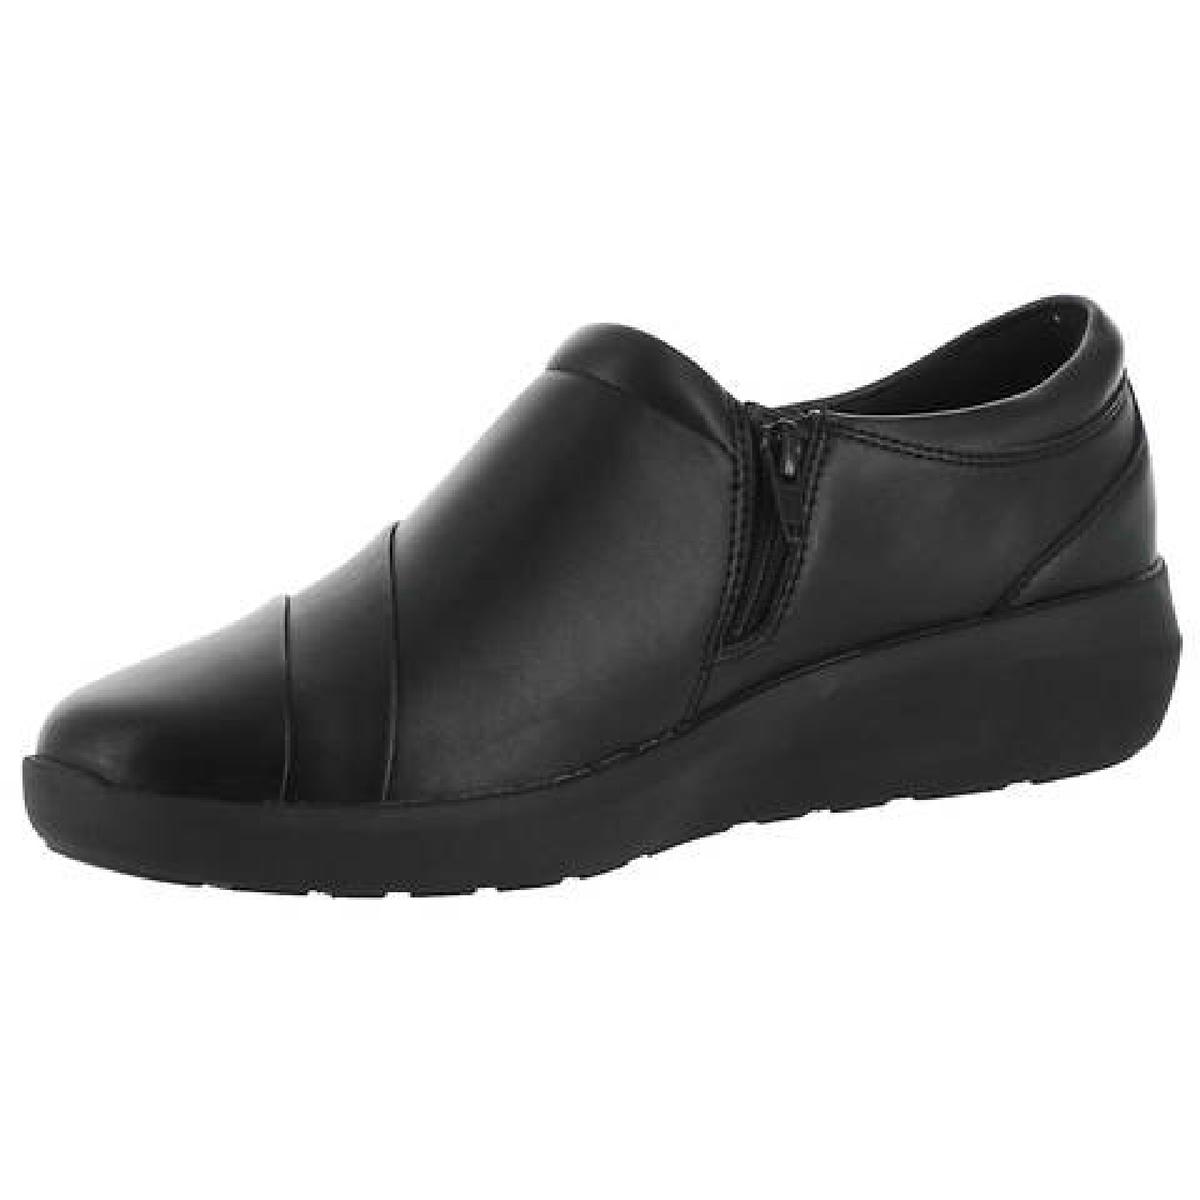 Clarks Kayleigh Charm Womens Flats Shoes